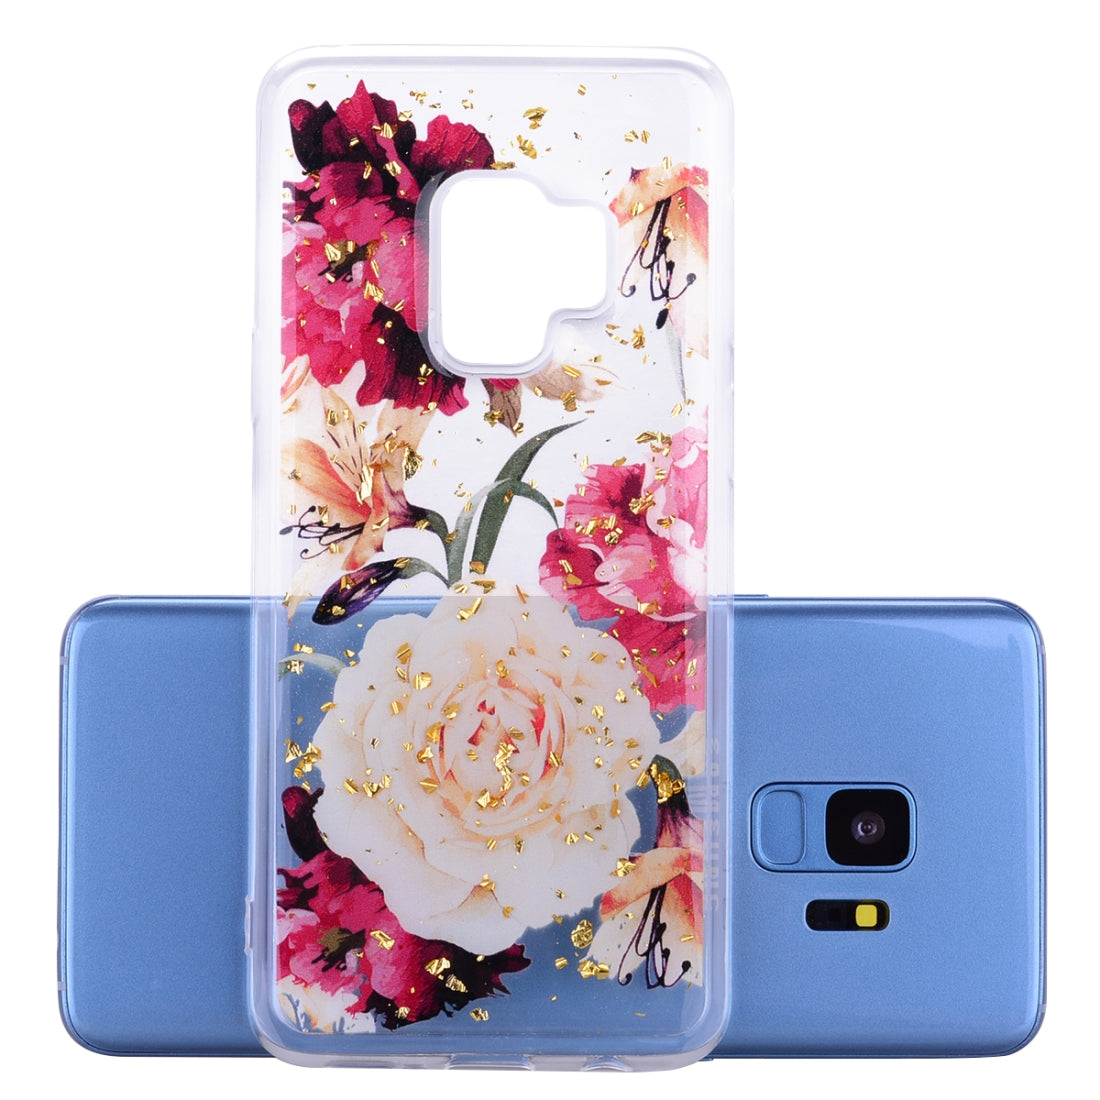 Cartoon Pattern Gold Foil Style Dropping Glue TPU Soft Protective Case for Galaxy S9+(Flower)